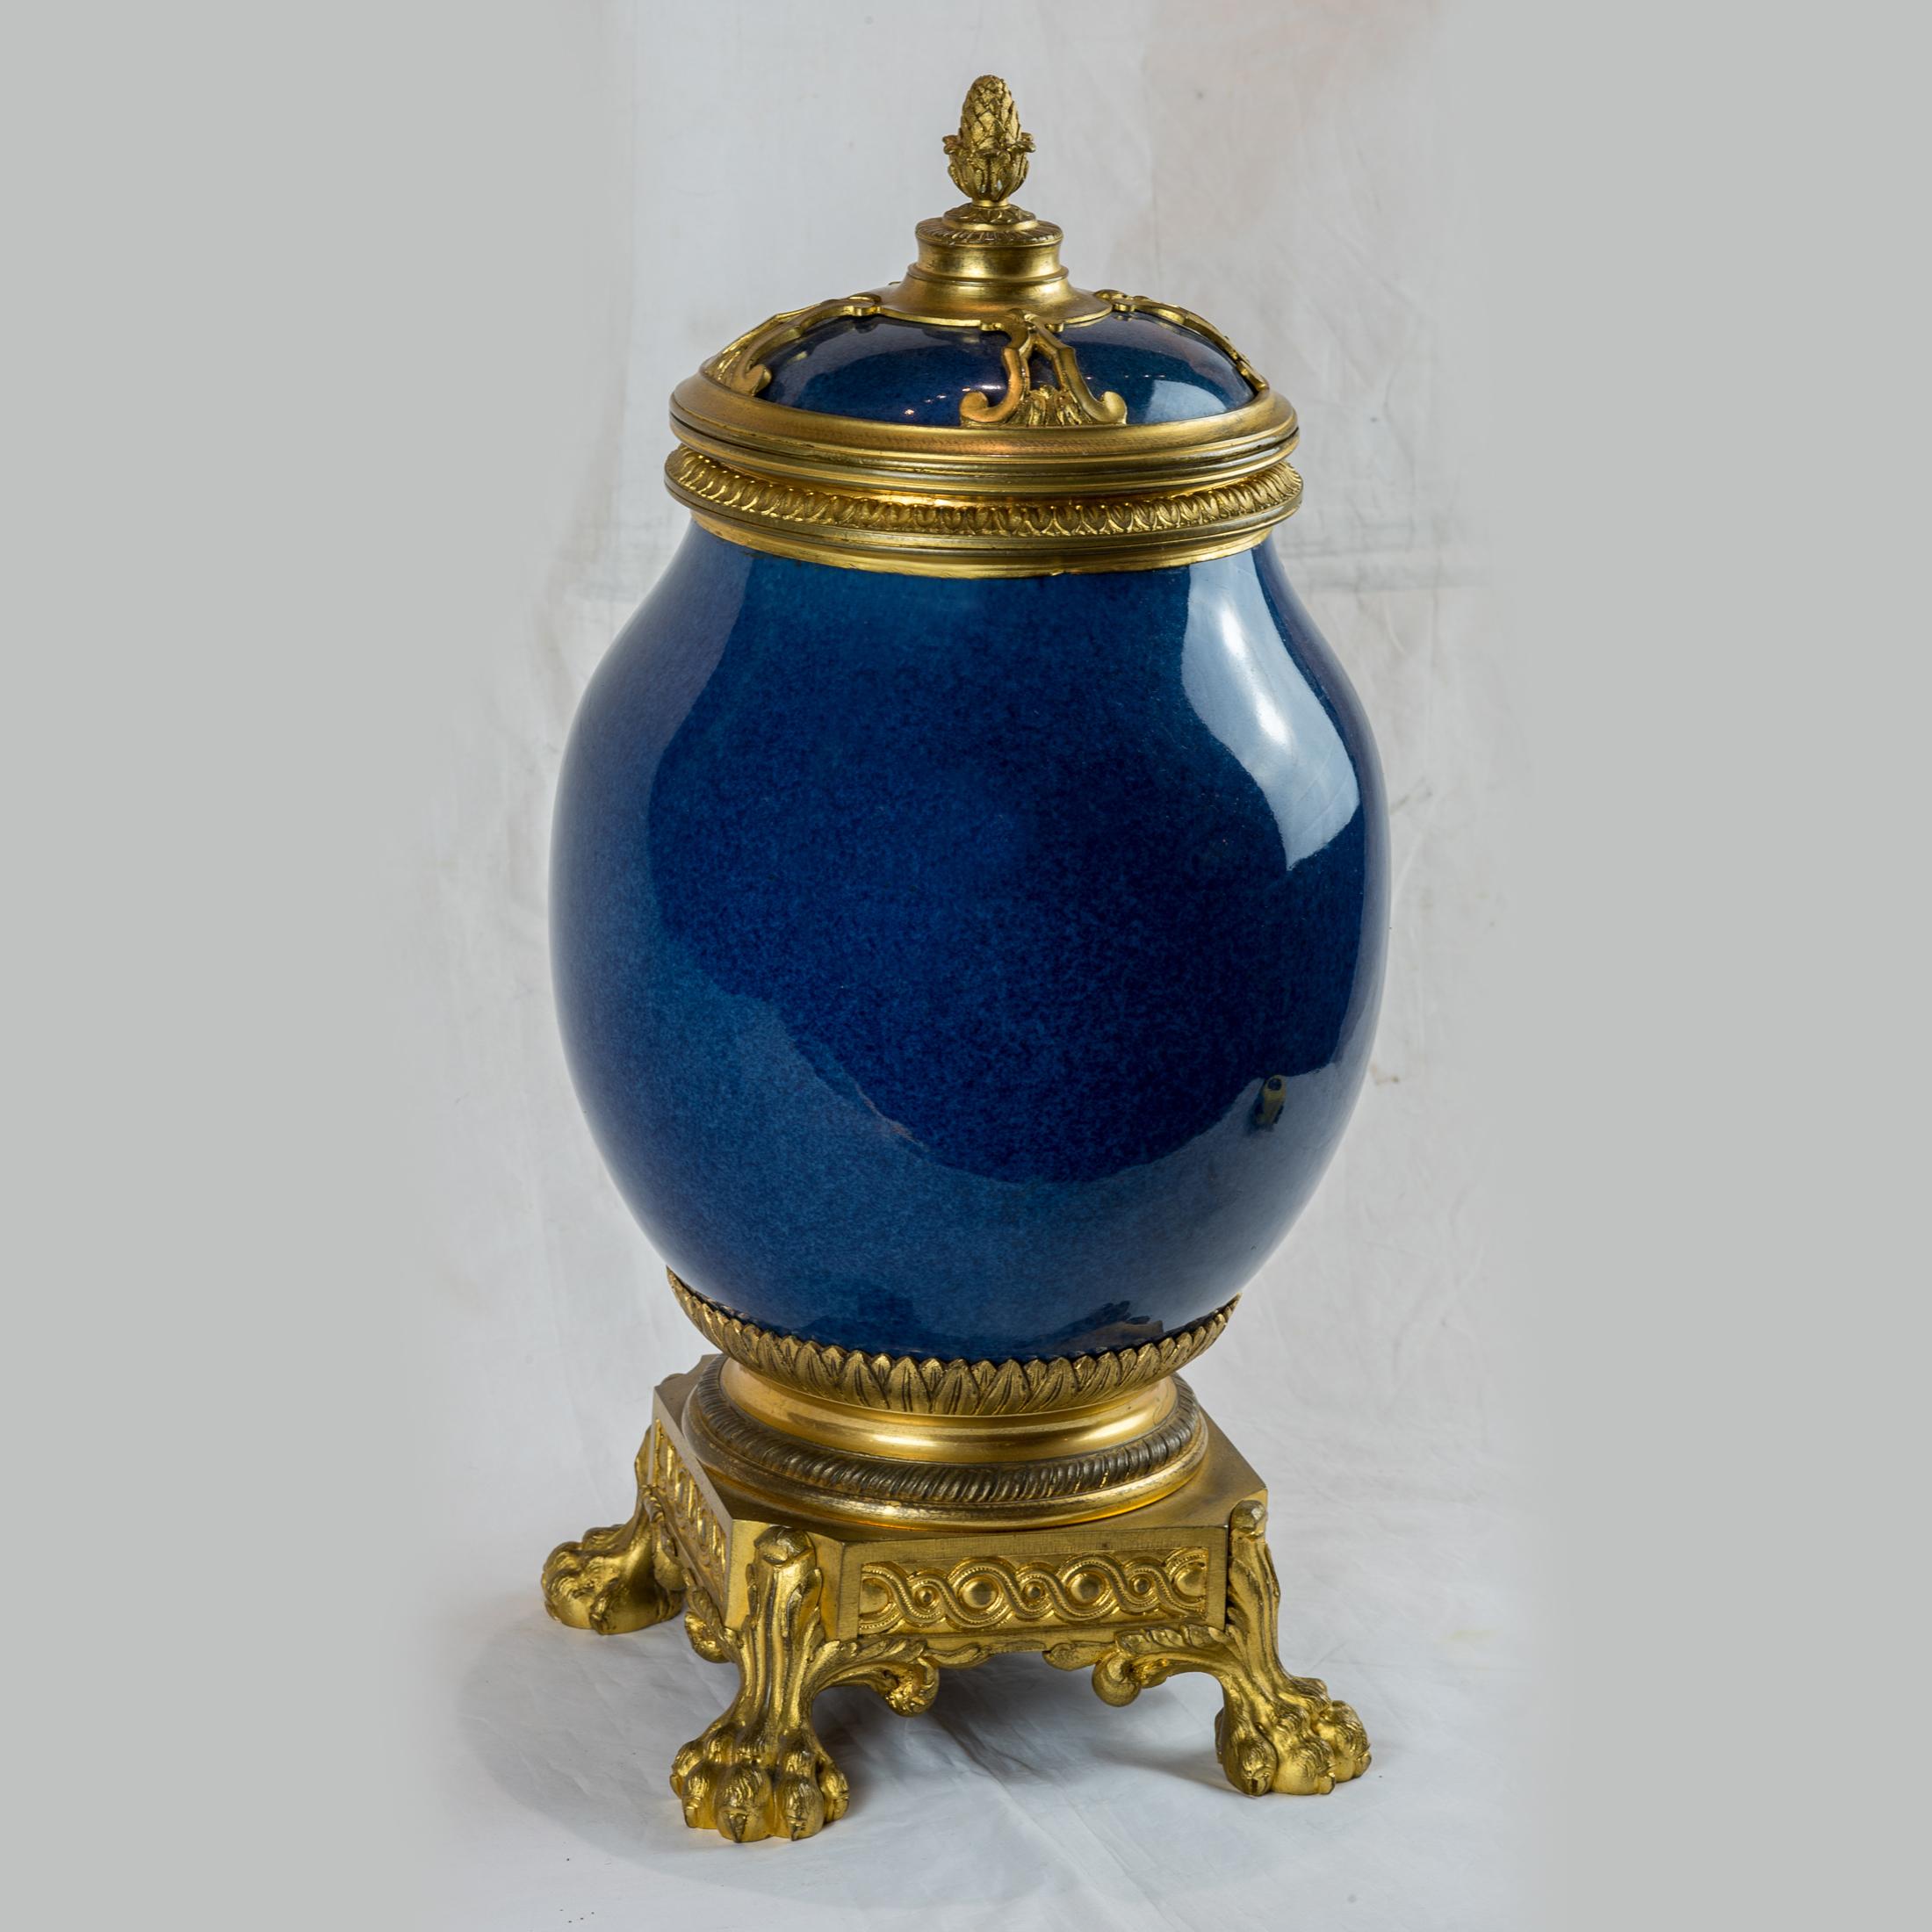 A fine quality pair of French Ormolu-Mounted Chinese Porcelain Vases and Covers in mottled blue-ground glaze. Resting on square ormolu base with paw feet.

Origin: French
Date: late 19th century
Size: 20.5 x 8 1/2 inches